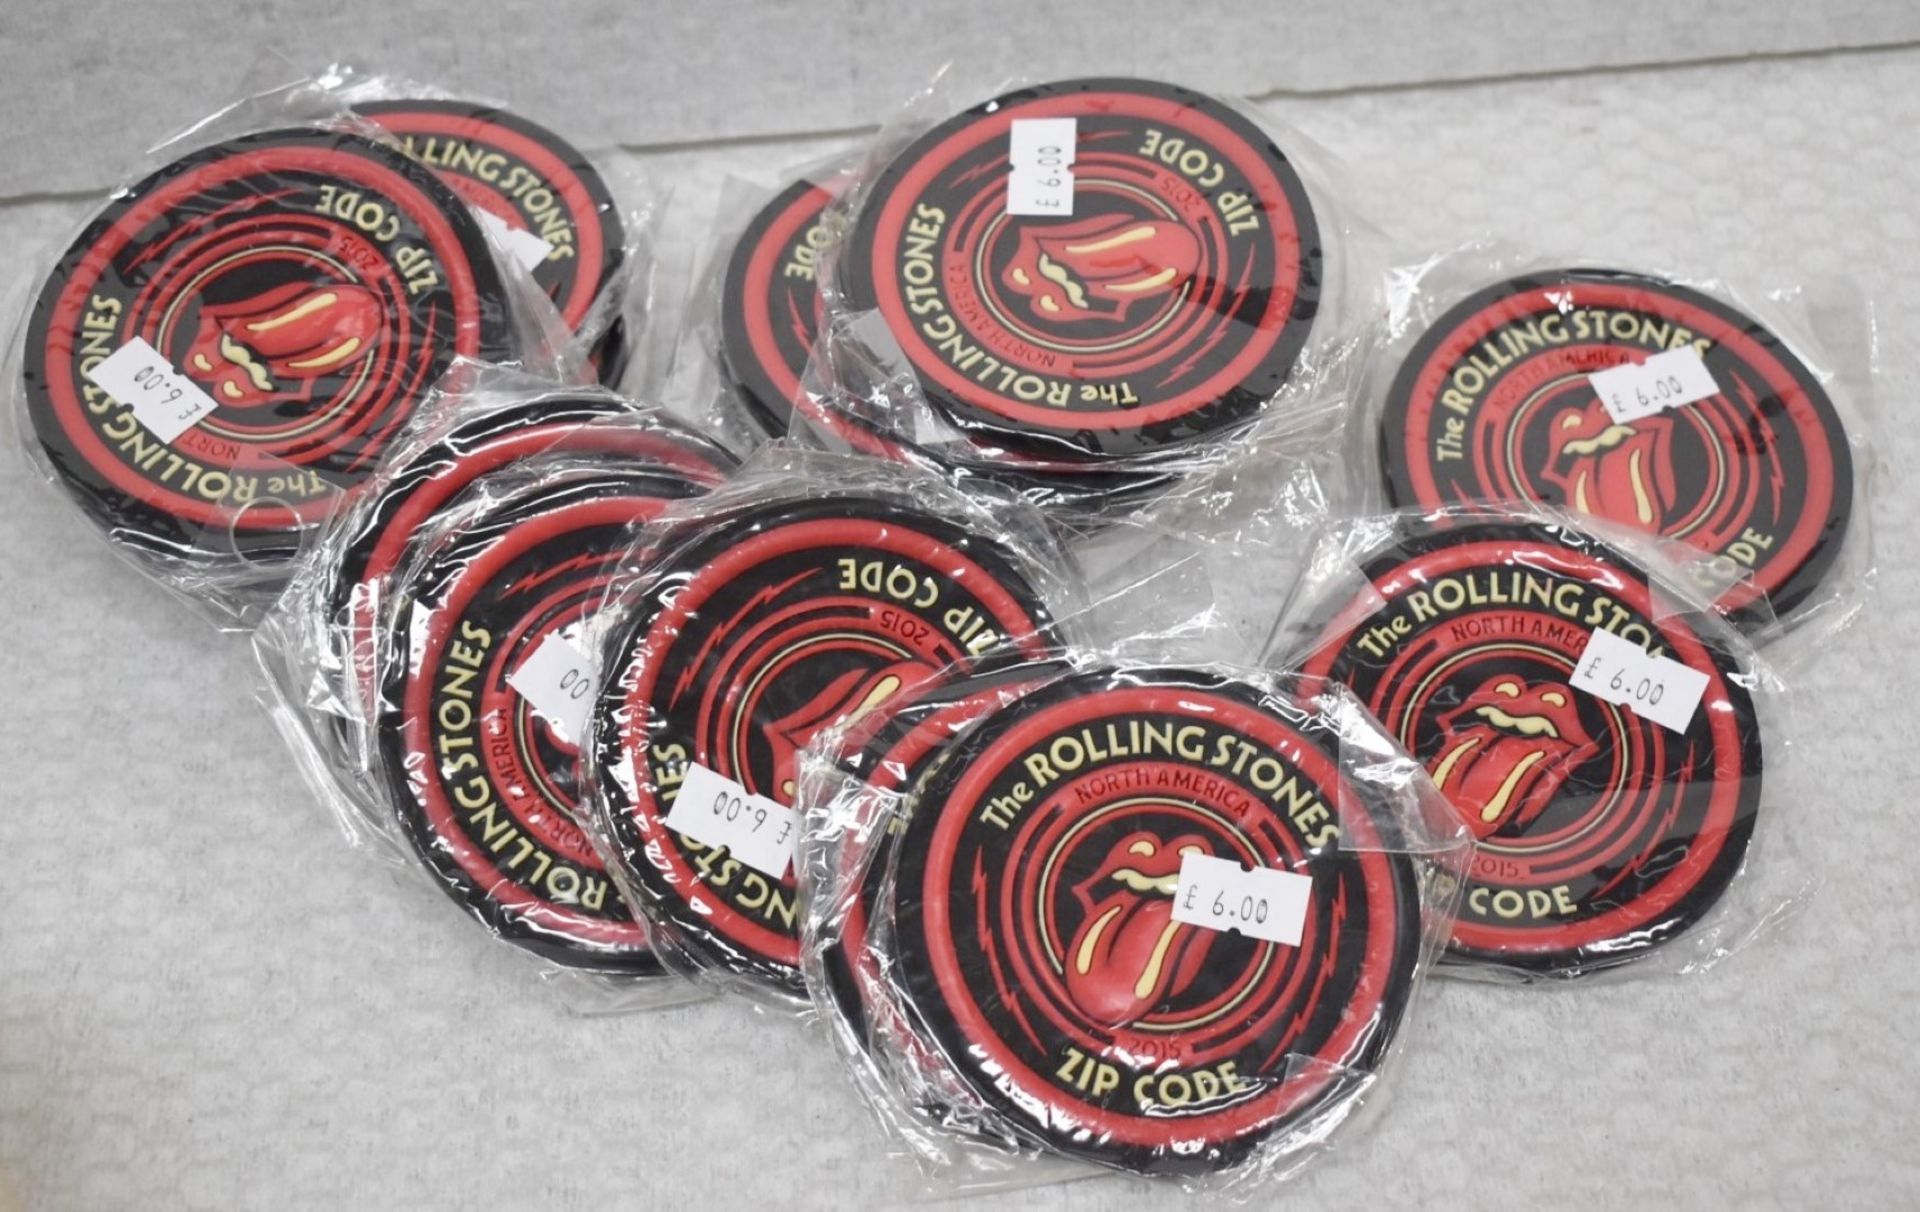 20 x Rolling Stones Table Coasters - North America Zip Code Tour With Iconic Tongue and Lips